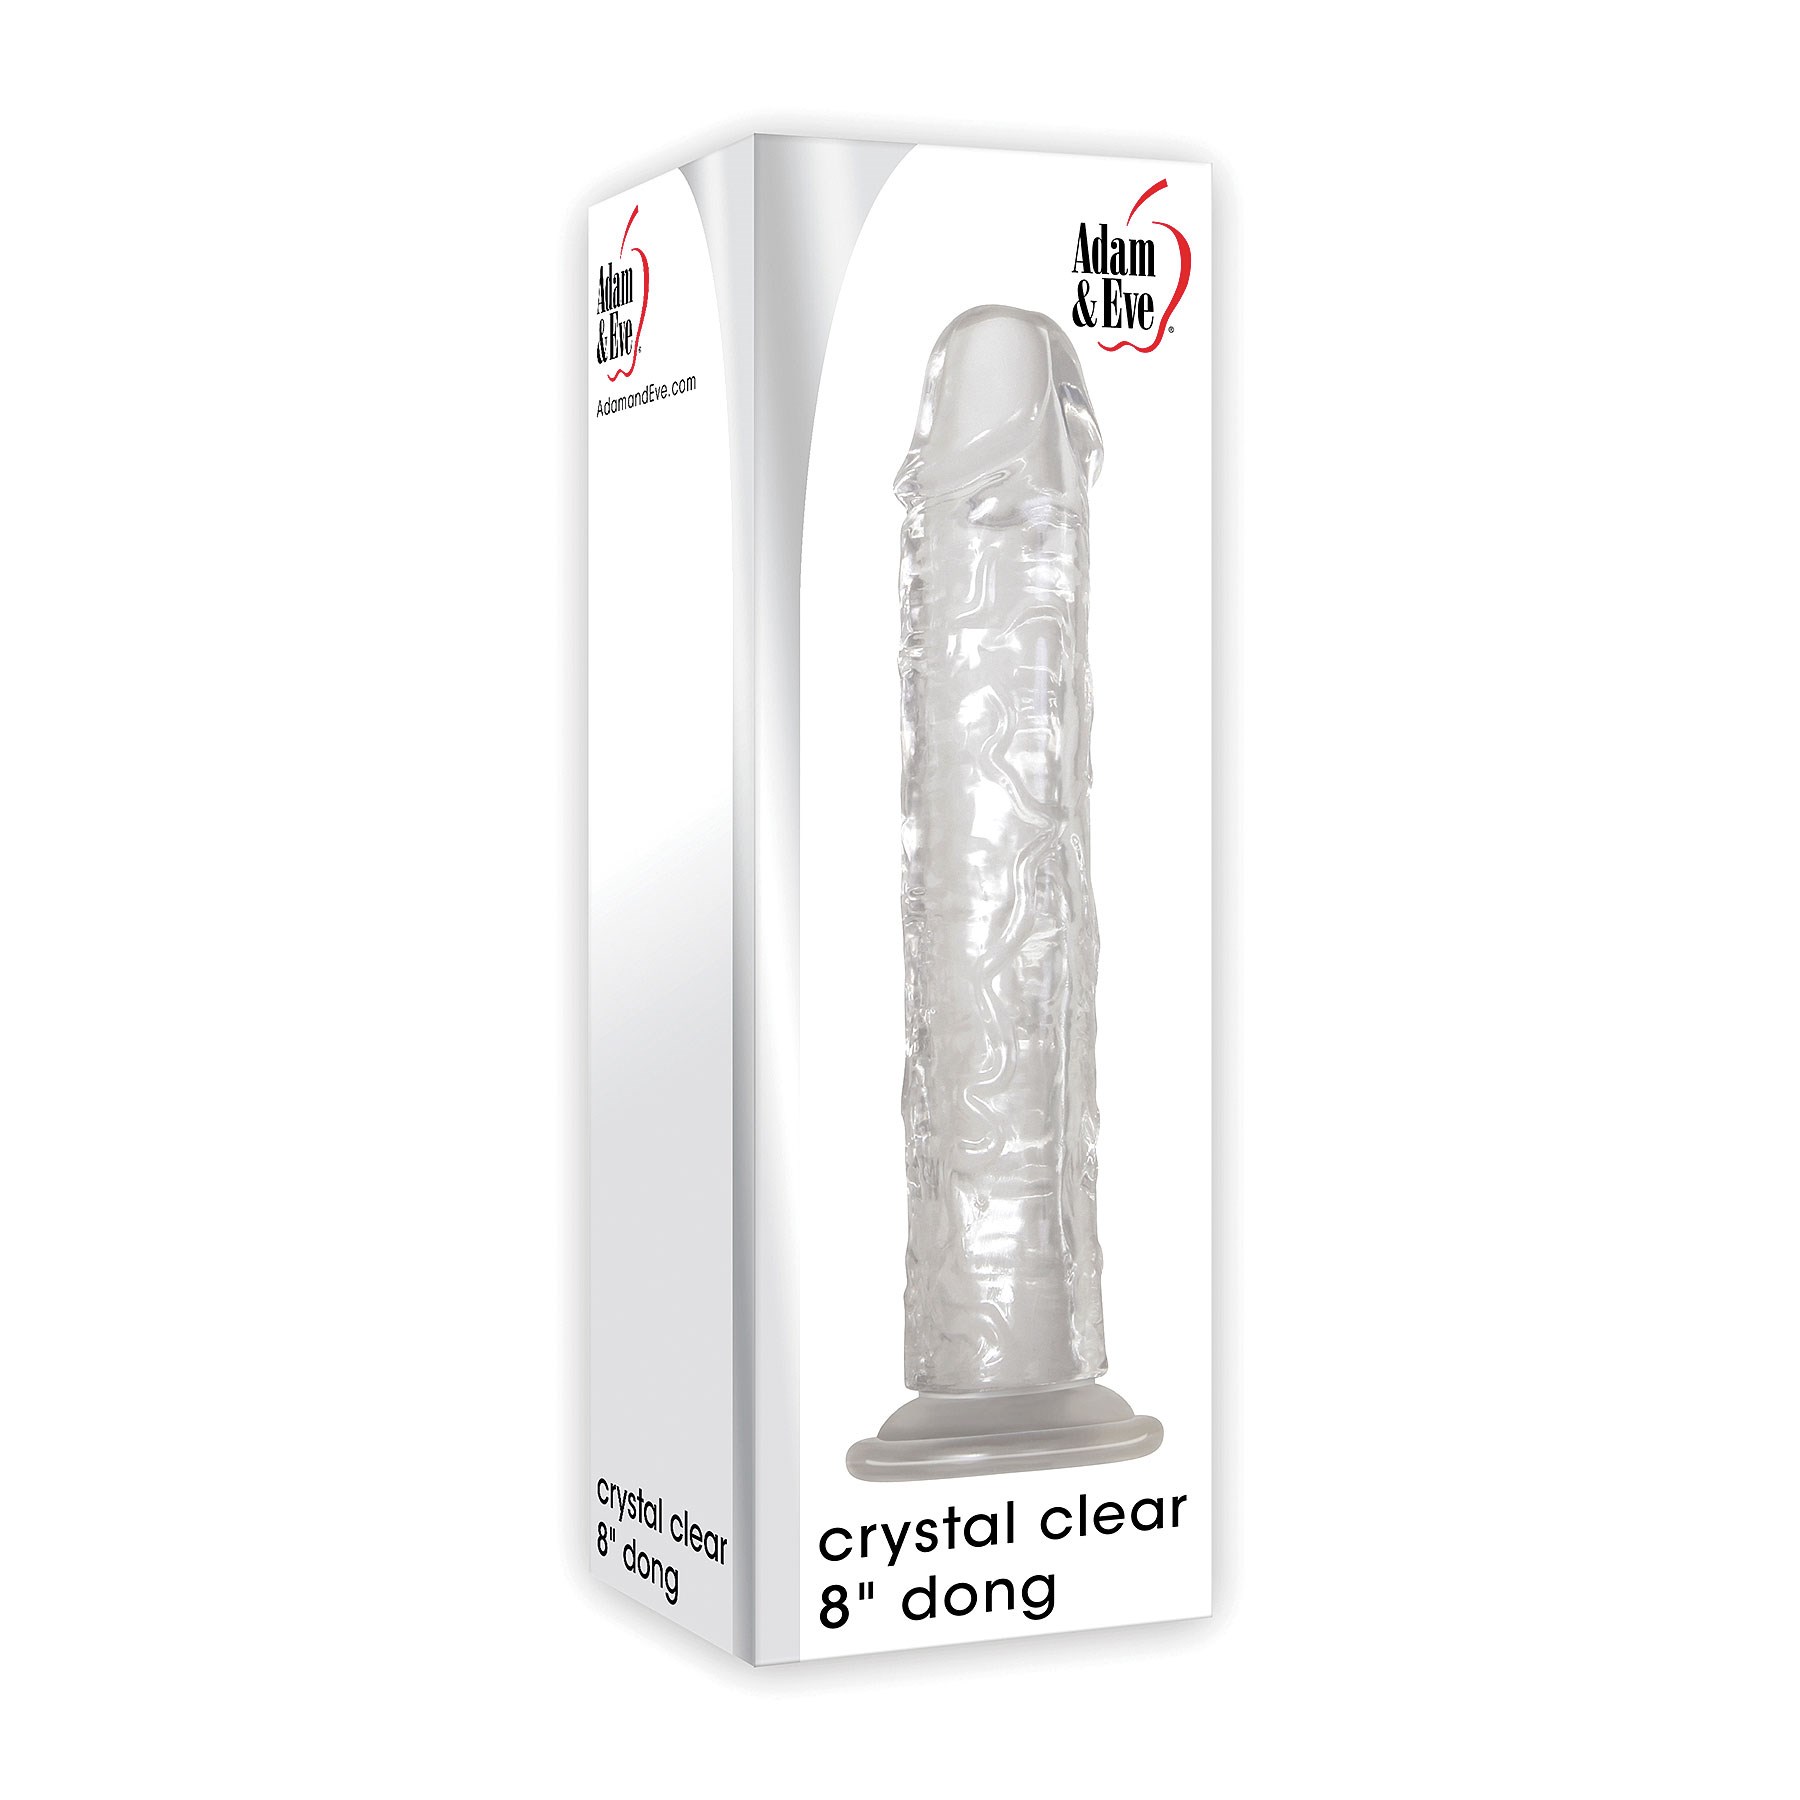 Adam & Eve Crystal Clear 8" Dong box